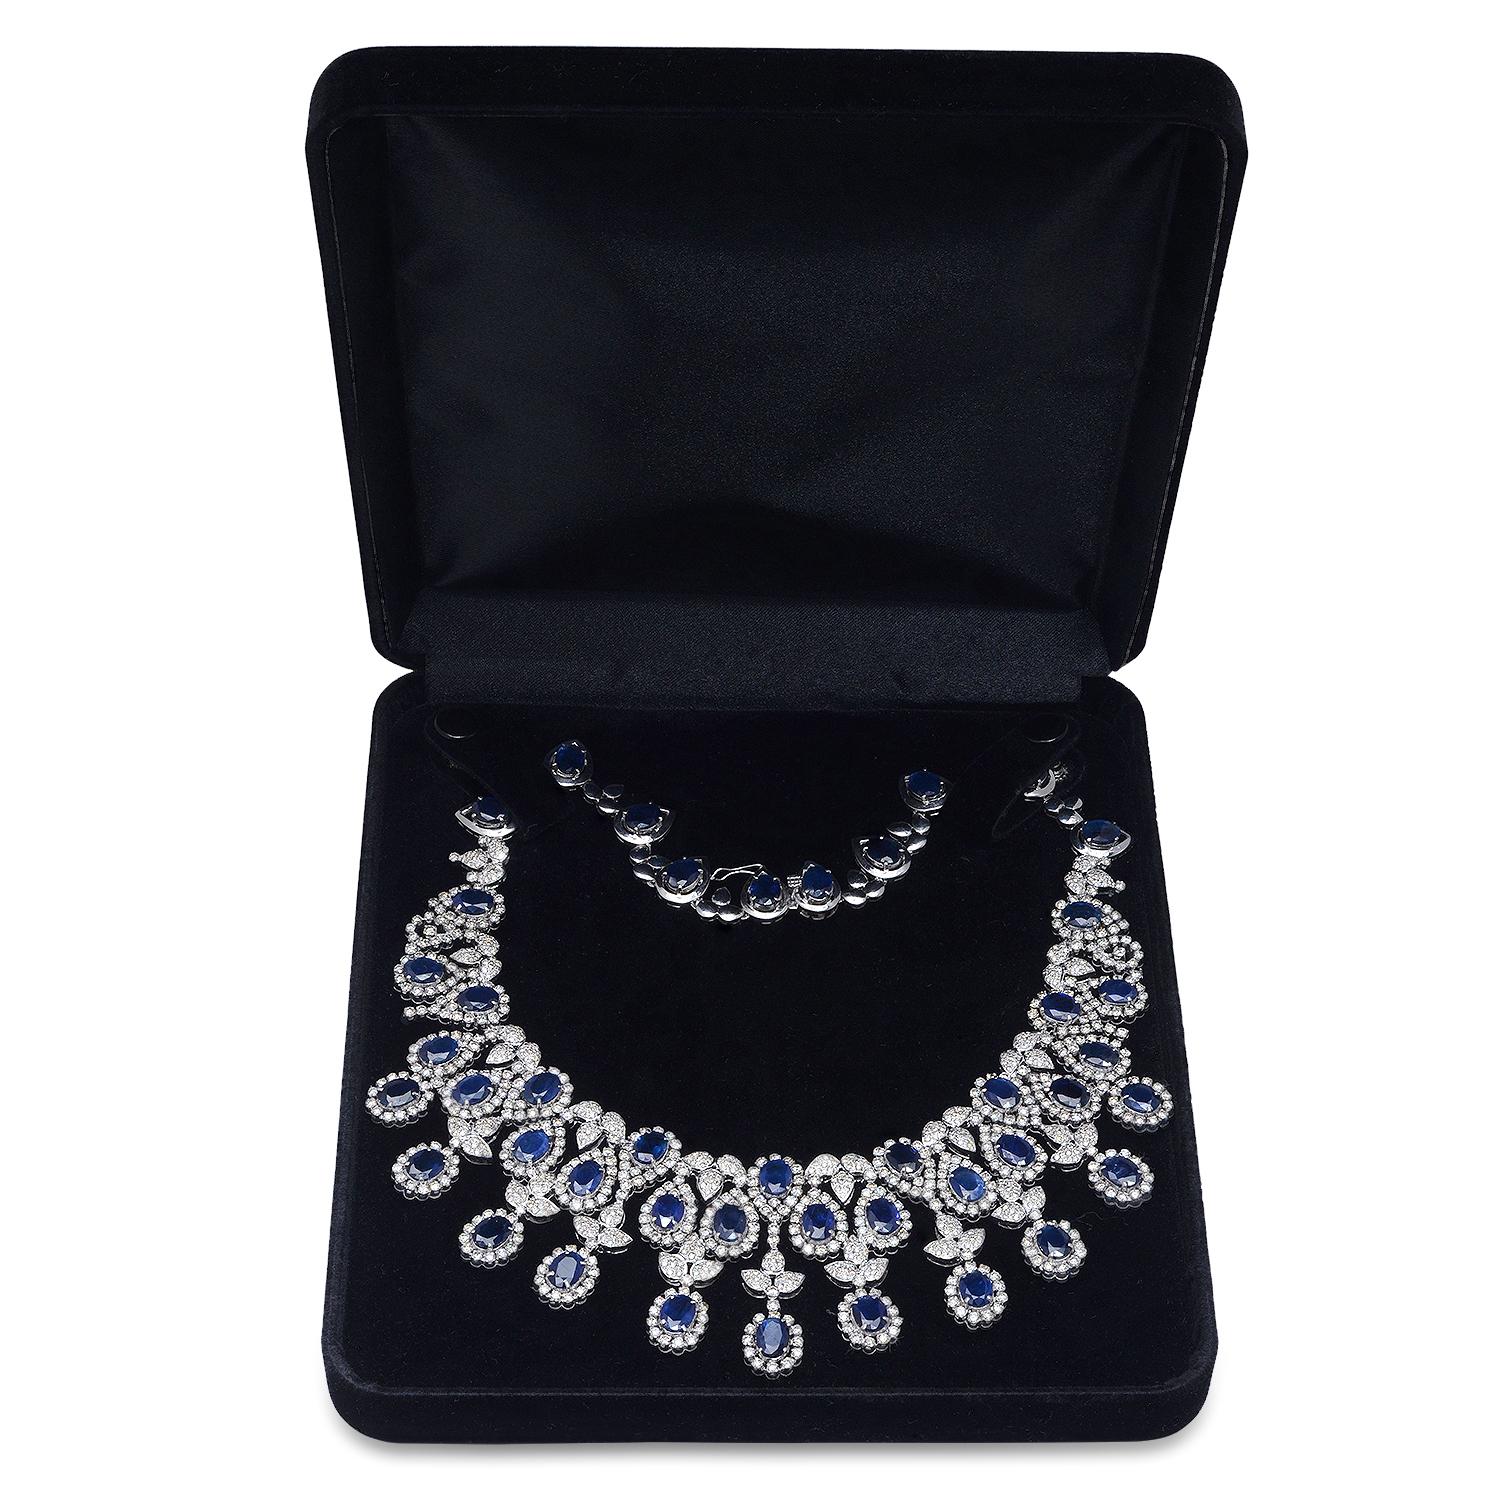 18K White Gold 75.40ct Sapphire and 17.95ct Diamond Necklace and Earring Set